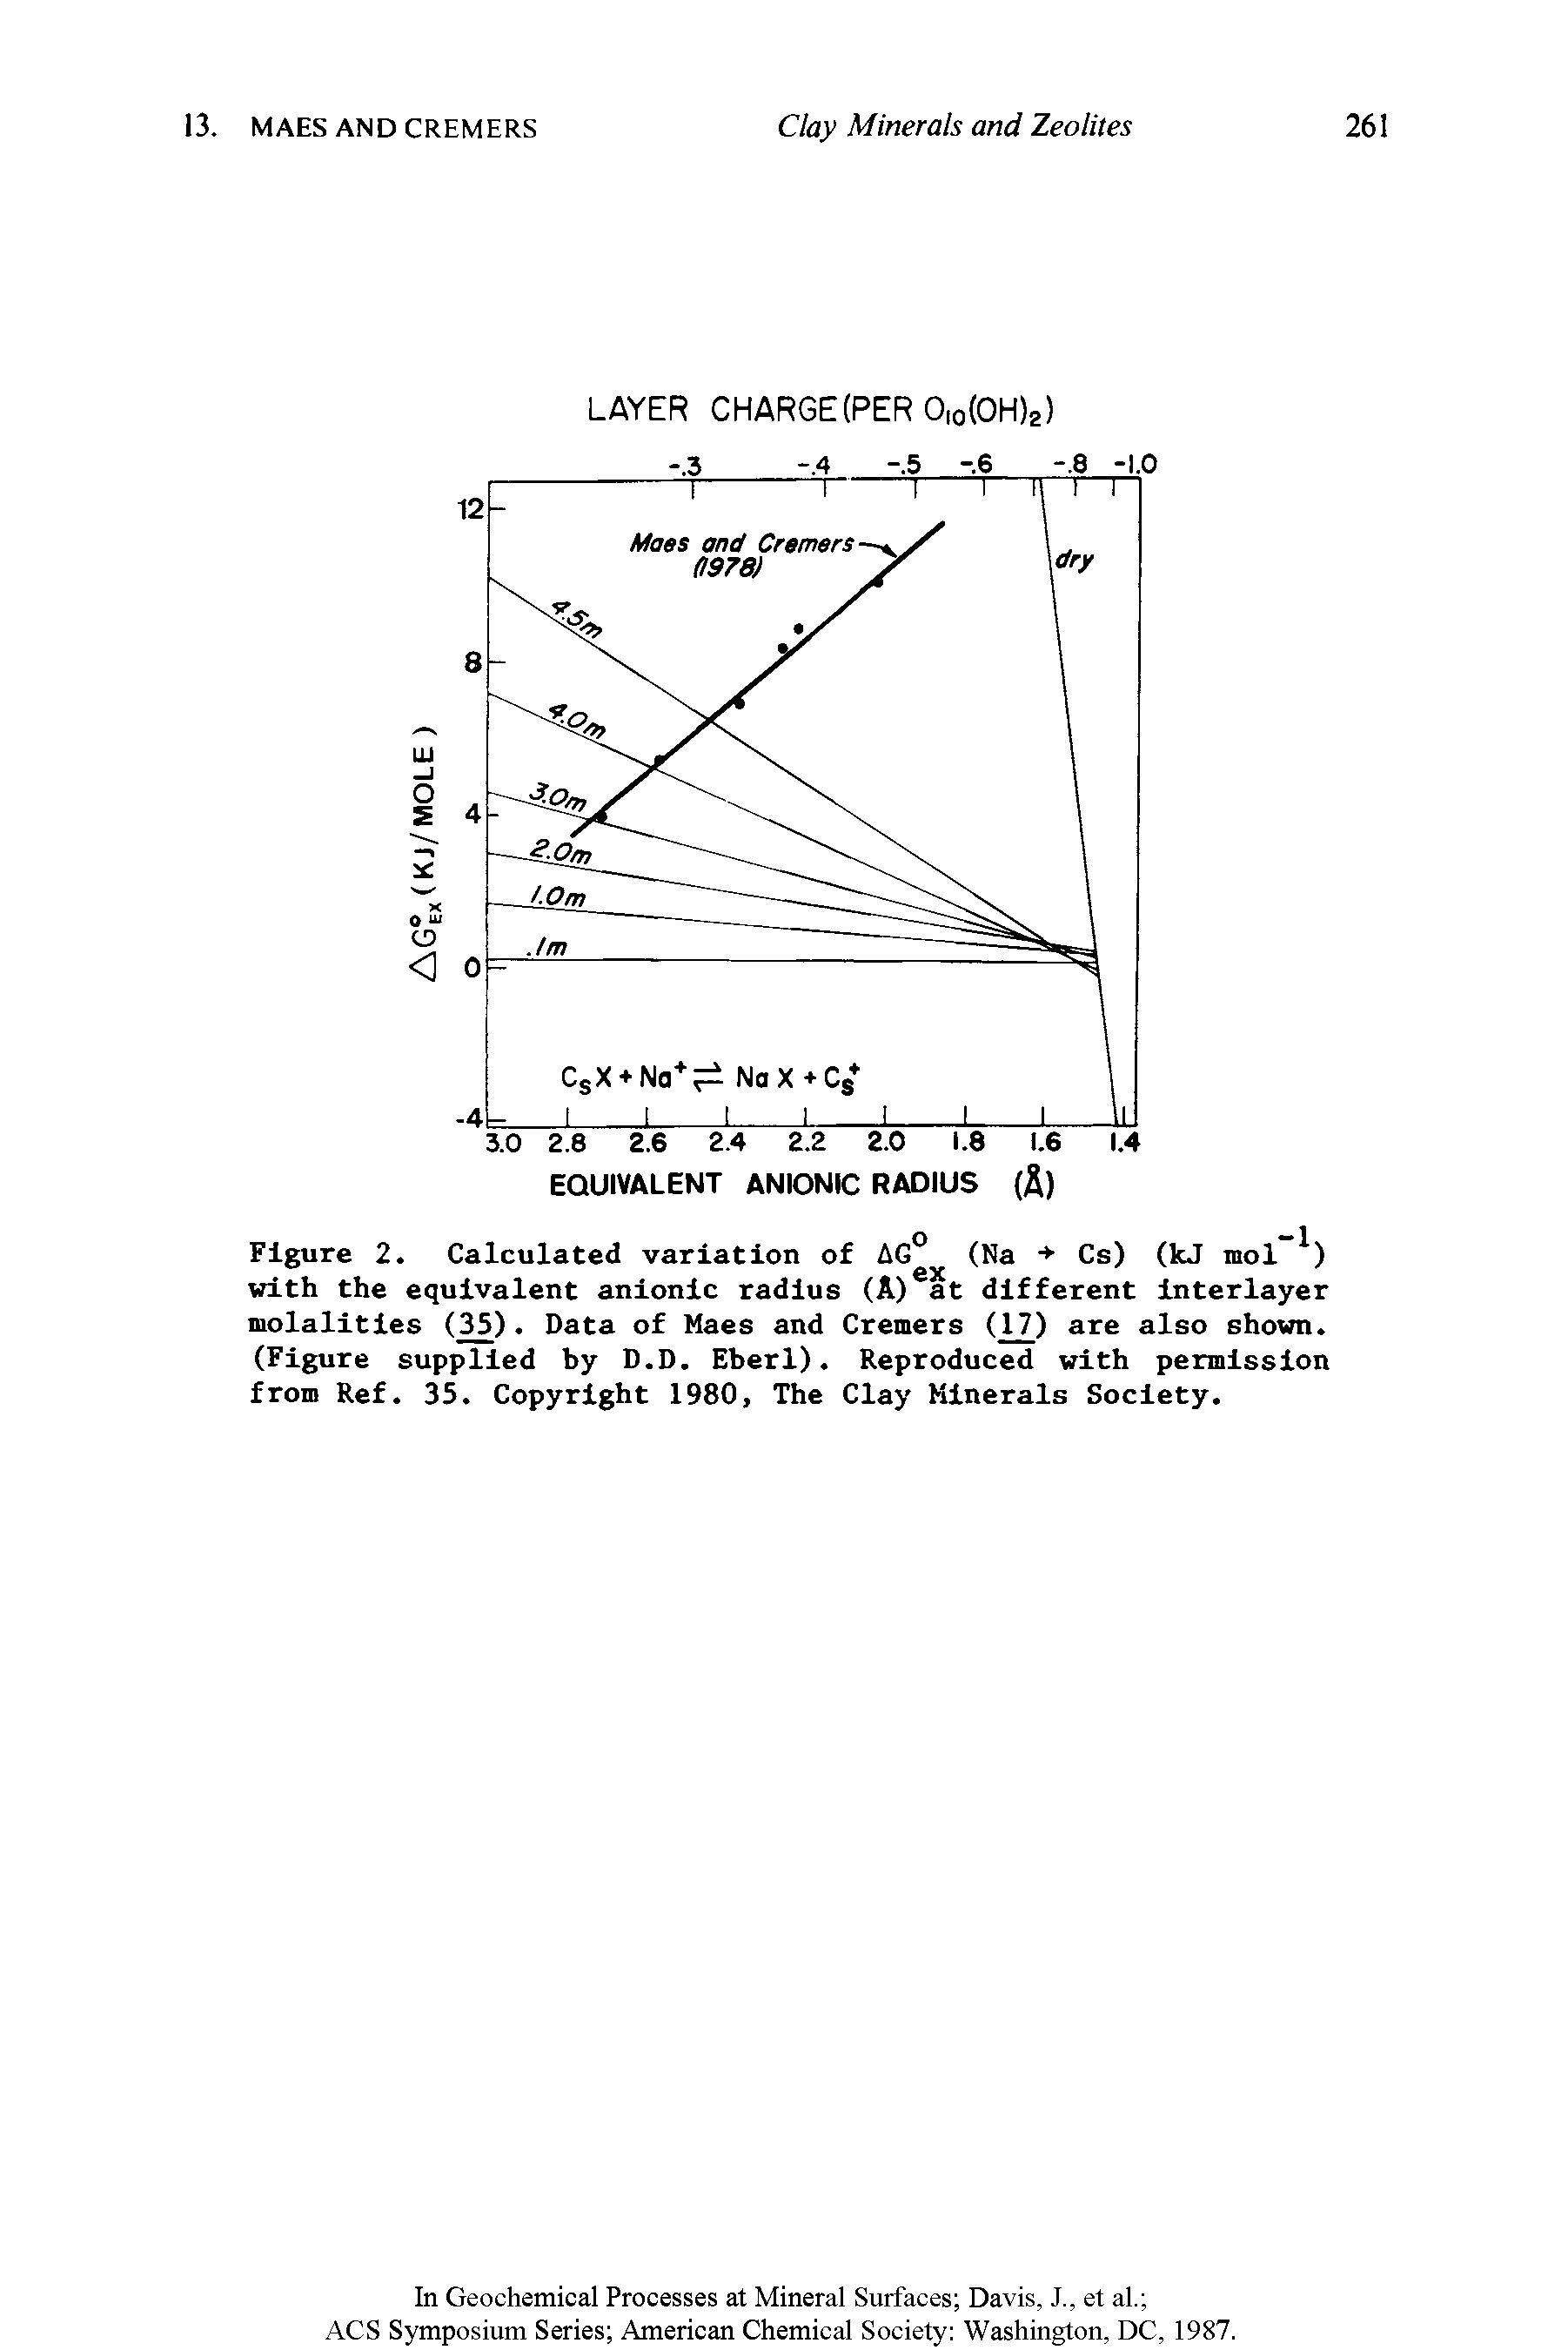 Figure 2. Calculated variation of AG° (Na Cs) (kJ mol ) with the equivalent anionic radius (A) at different interlayer molalities (35). Data of Maes and Cremers (17) are also shown. (Figure supplied by D.D. Eberl). Reproduced with permission from Ref. 35. Copyright 1980, The Clay Minerals Society.